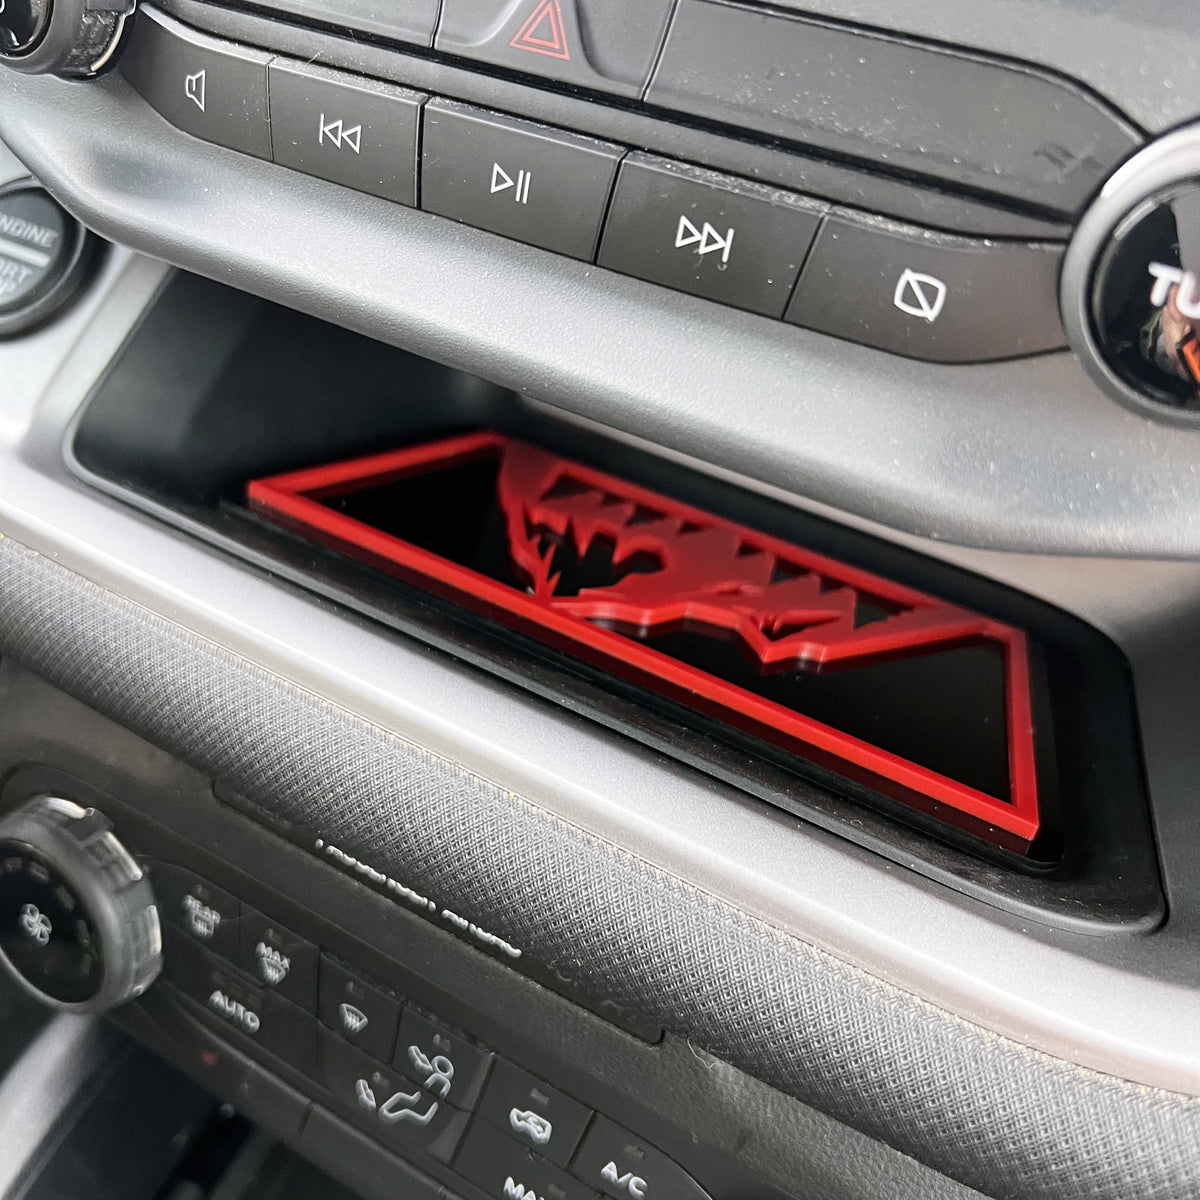 Upper Console Storage Pocket Inlay Badge - Mountain - Fits 2021+ Bronco® Sport - Multiple Colors Available